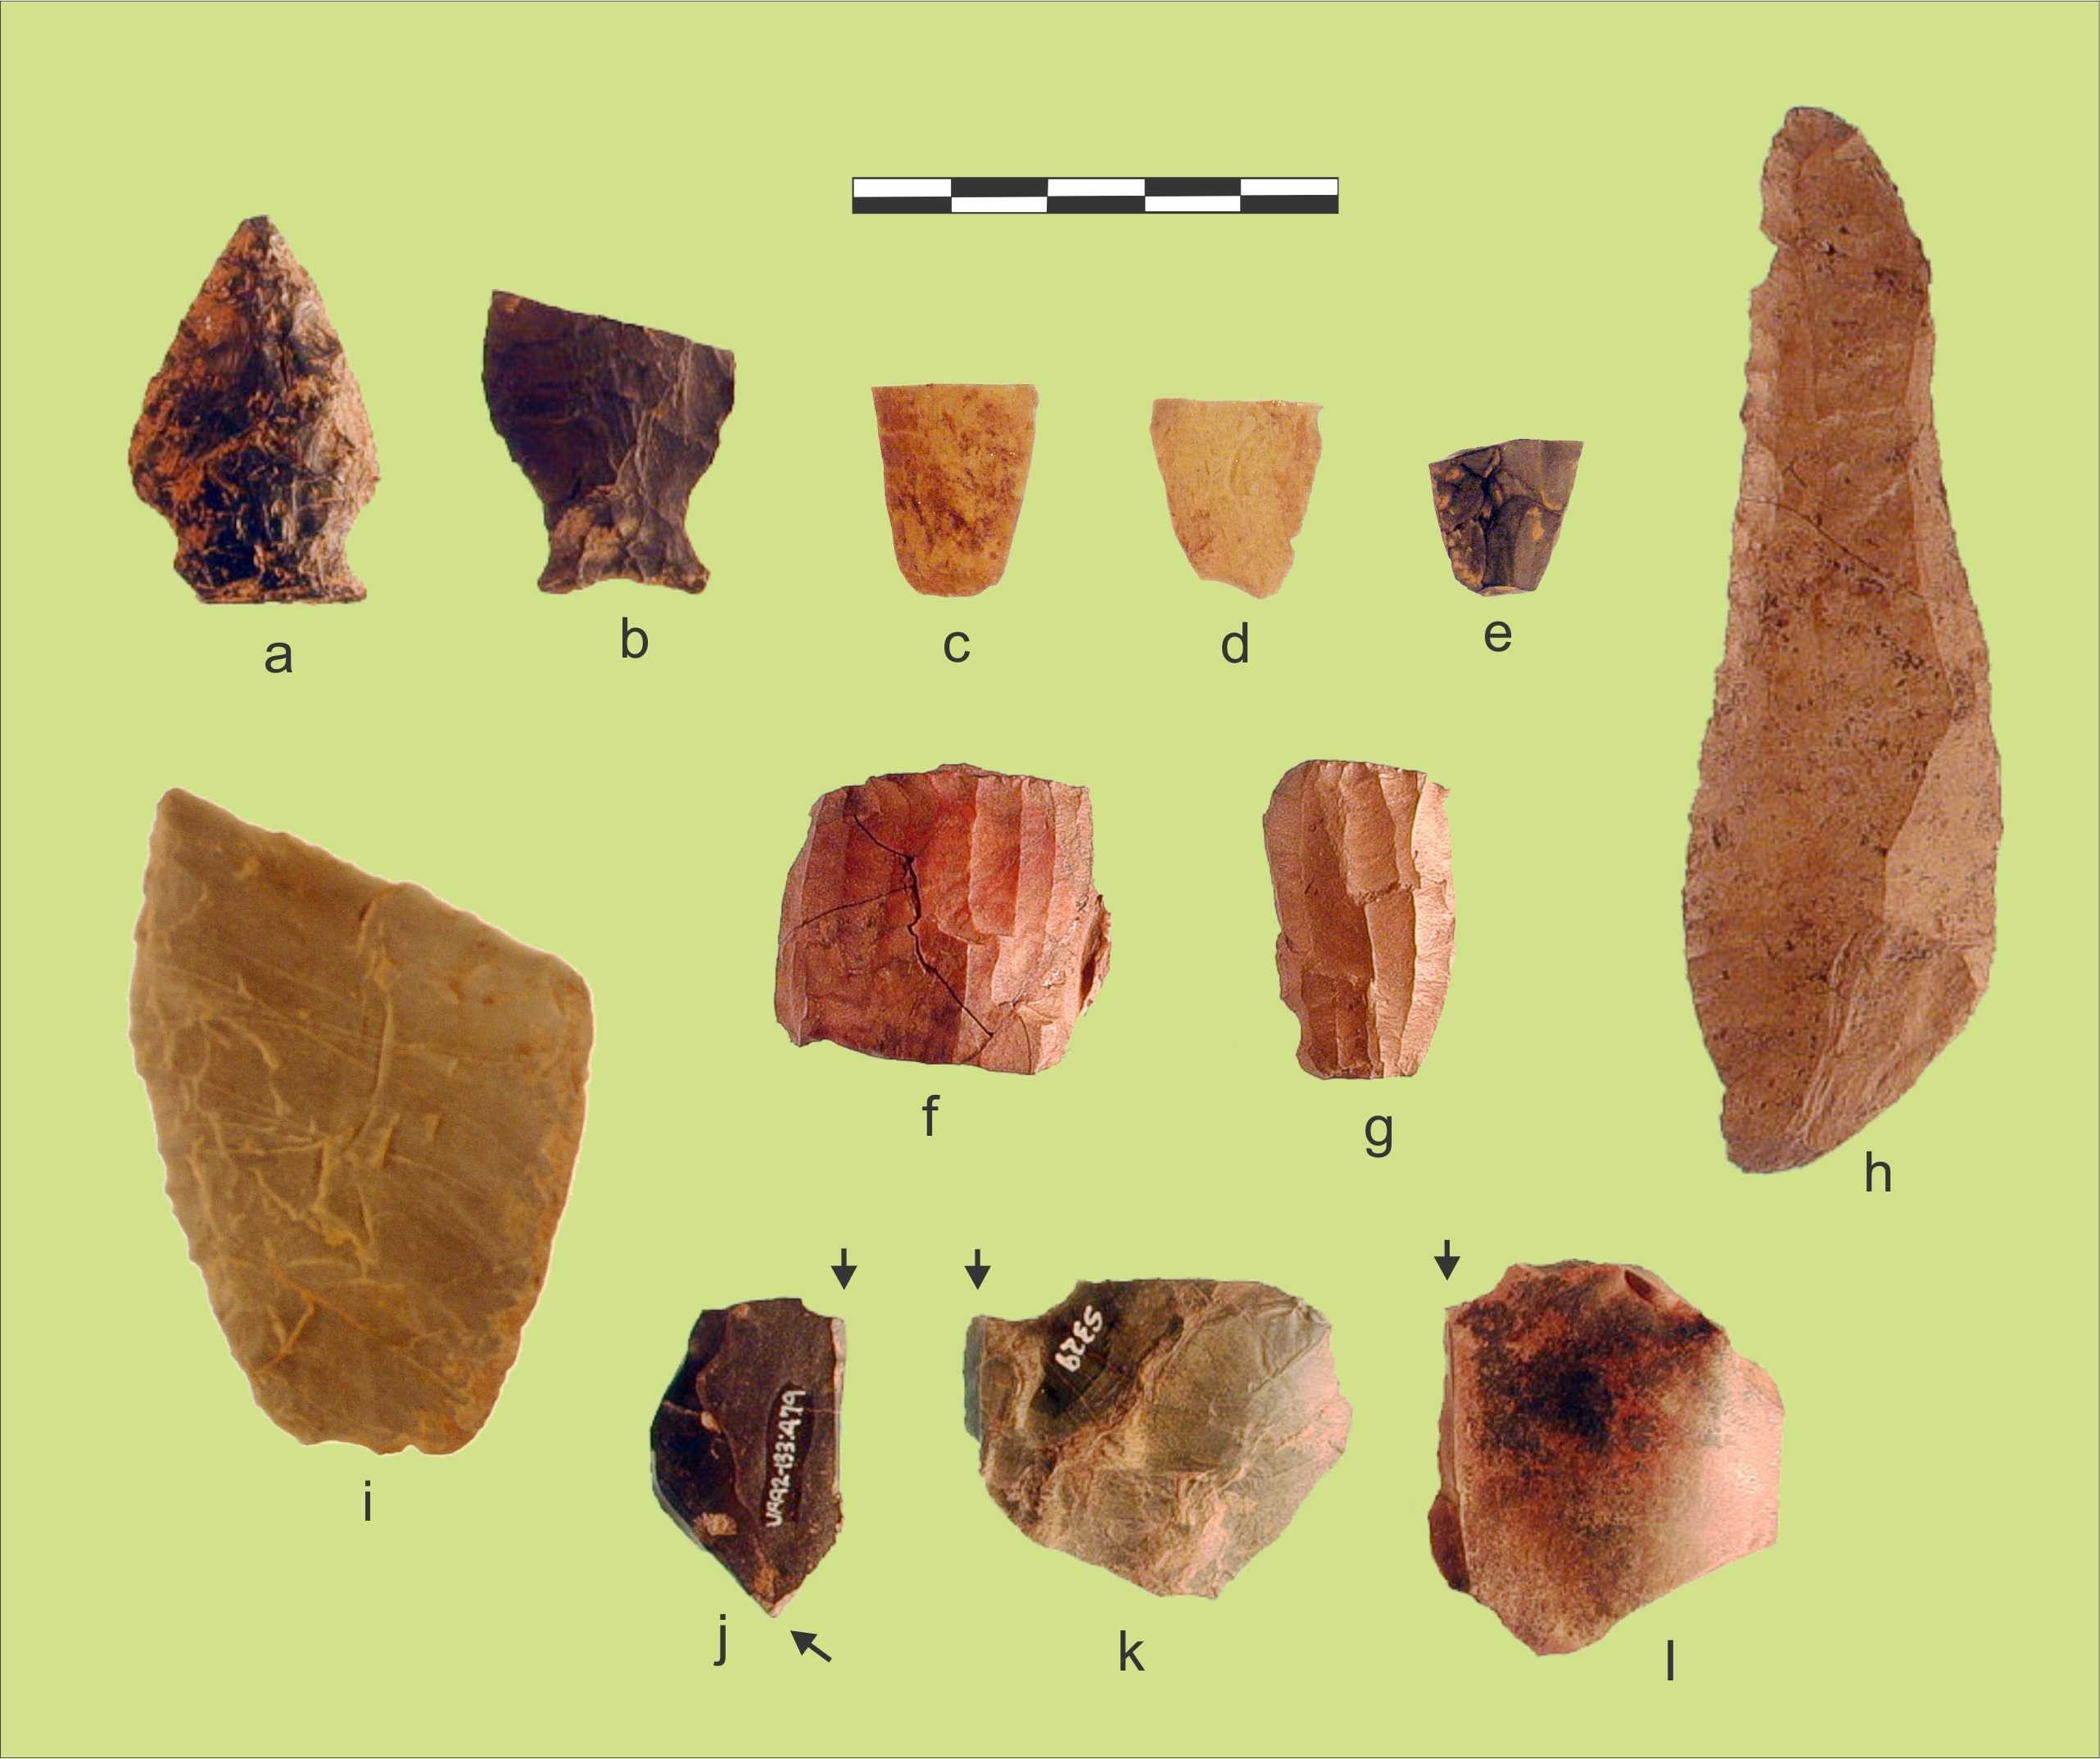 Swan Point Cultural Zone 1a artifacts: a. notched point; b. “fish-tail” notched point fragment; c.-e. lanceolate point base fragments; f., g. tabular microblade cores; h. side scraper; i. thin bifacial knife; j.-l. Donnely burins.